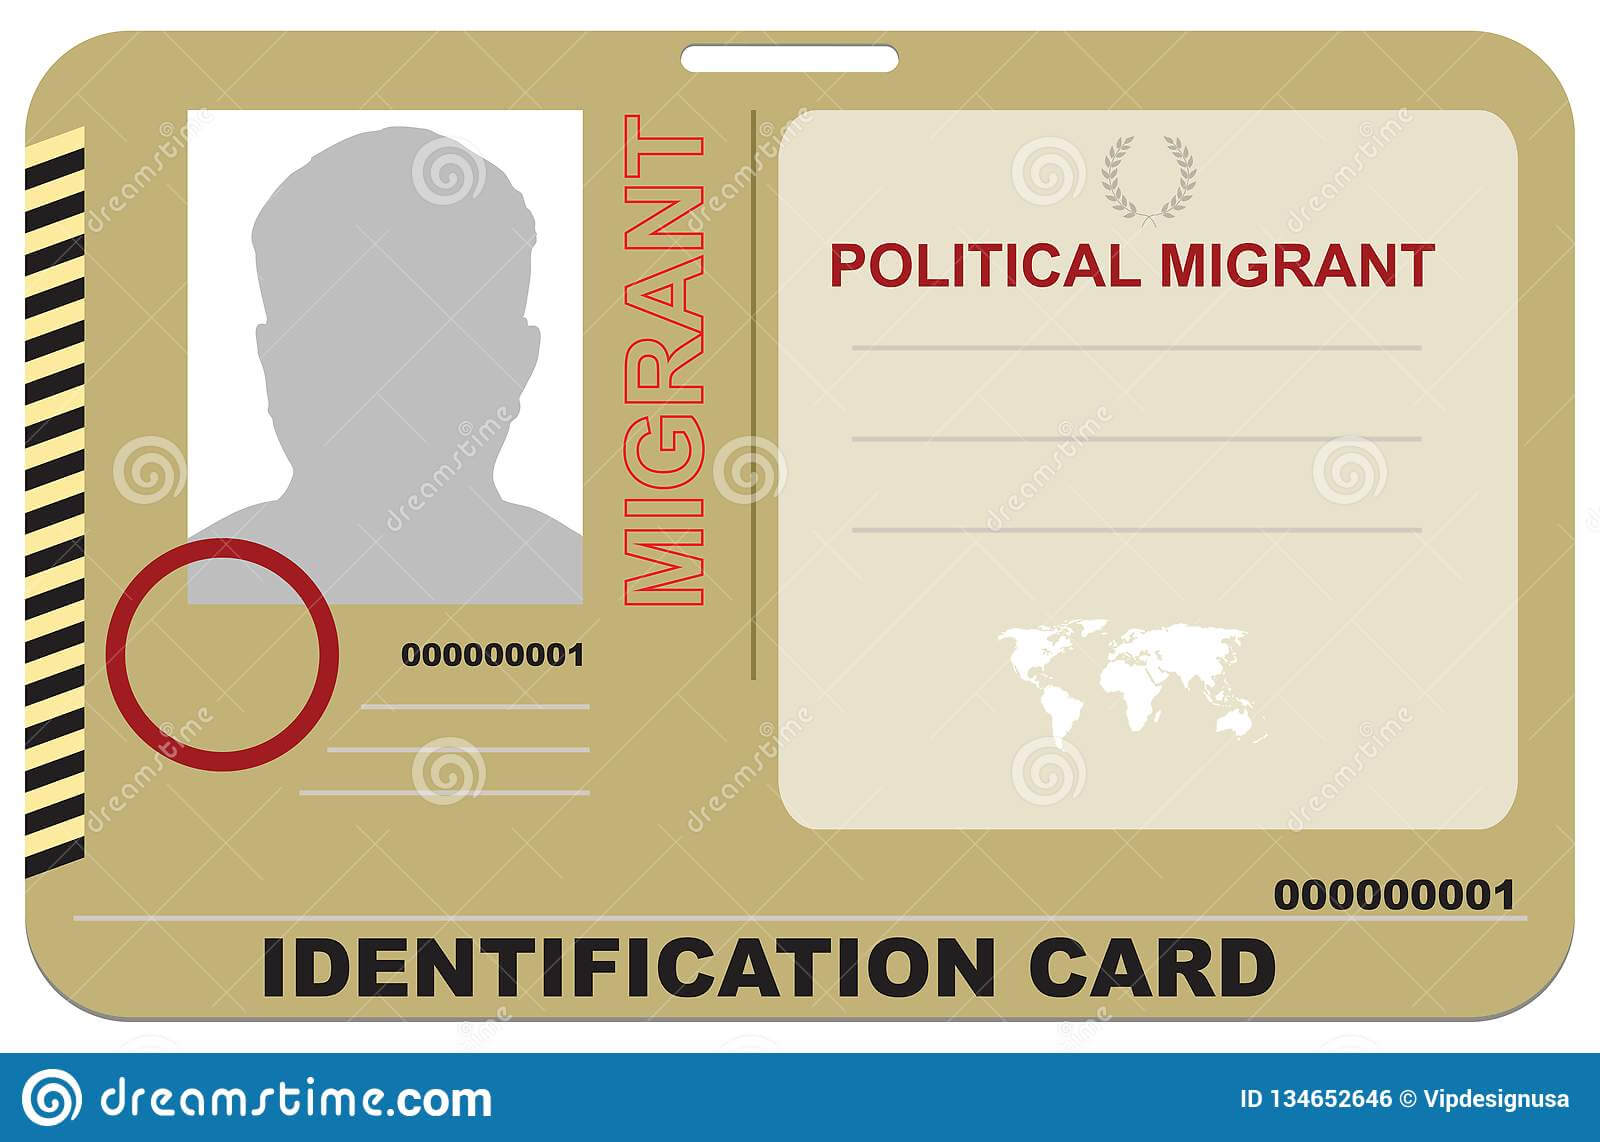 Identification Card Political Migrant Stock Vector inside ...